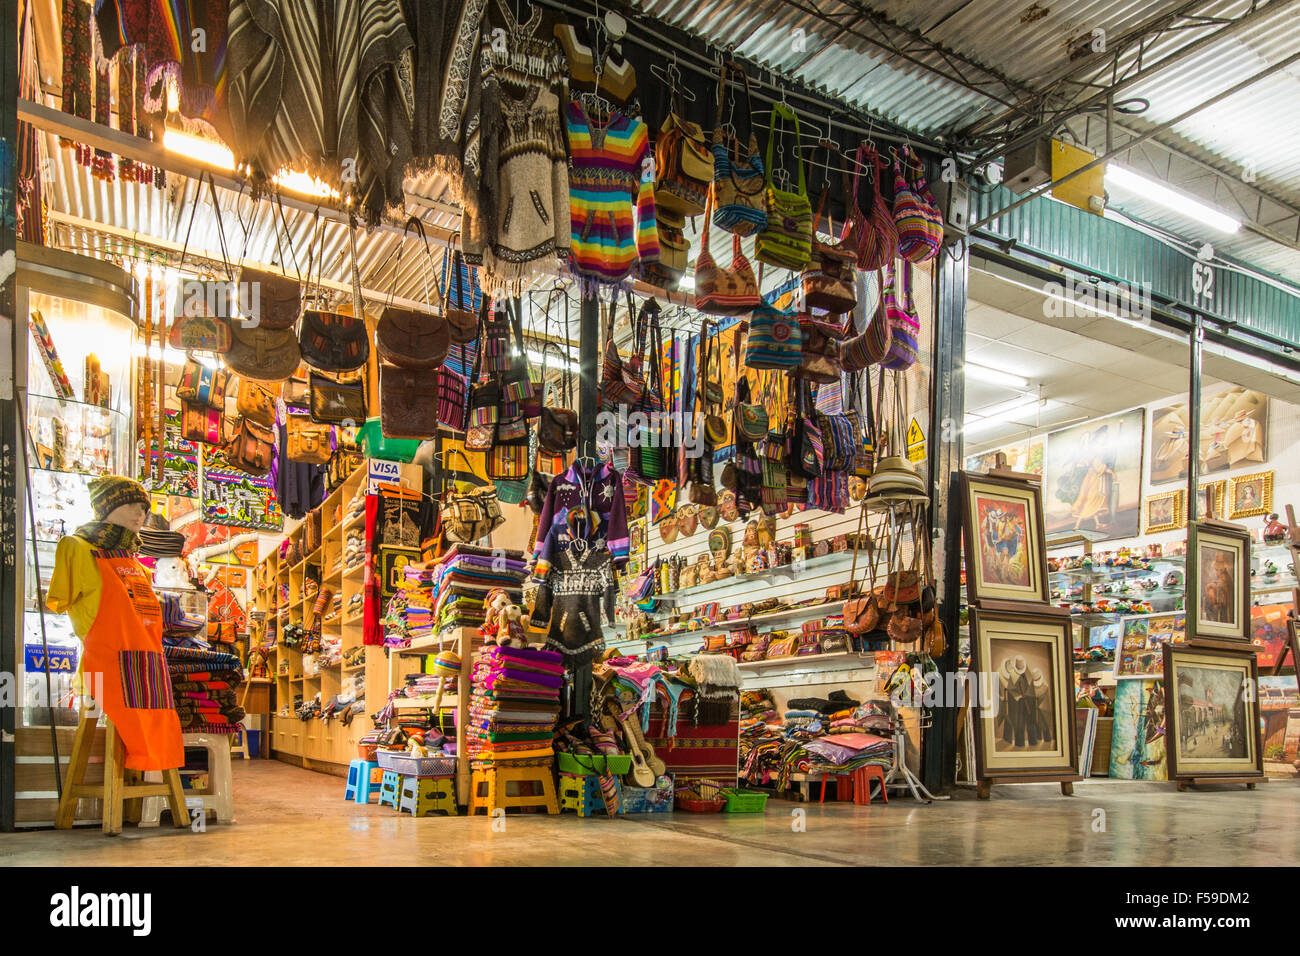 Typical Peruvian clothes, souvenirs and crafts on sale at the Inka Market in Miraflores in central Lima, Peru Stock Photo